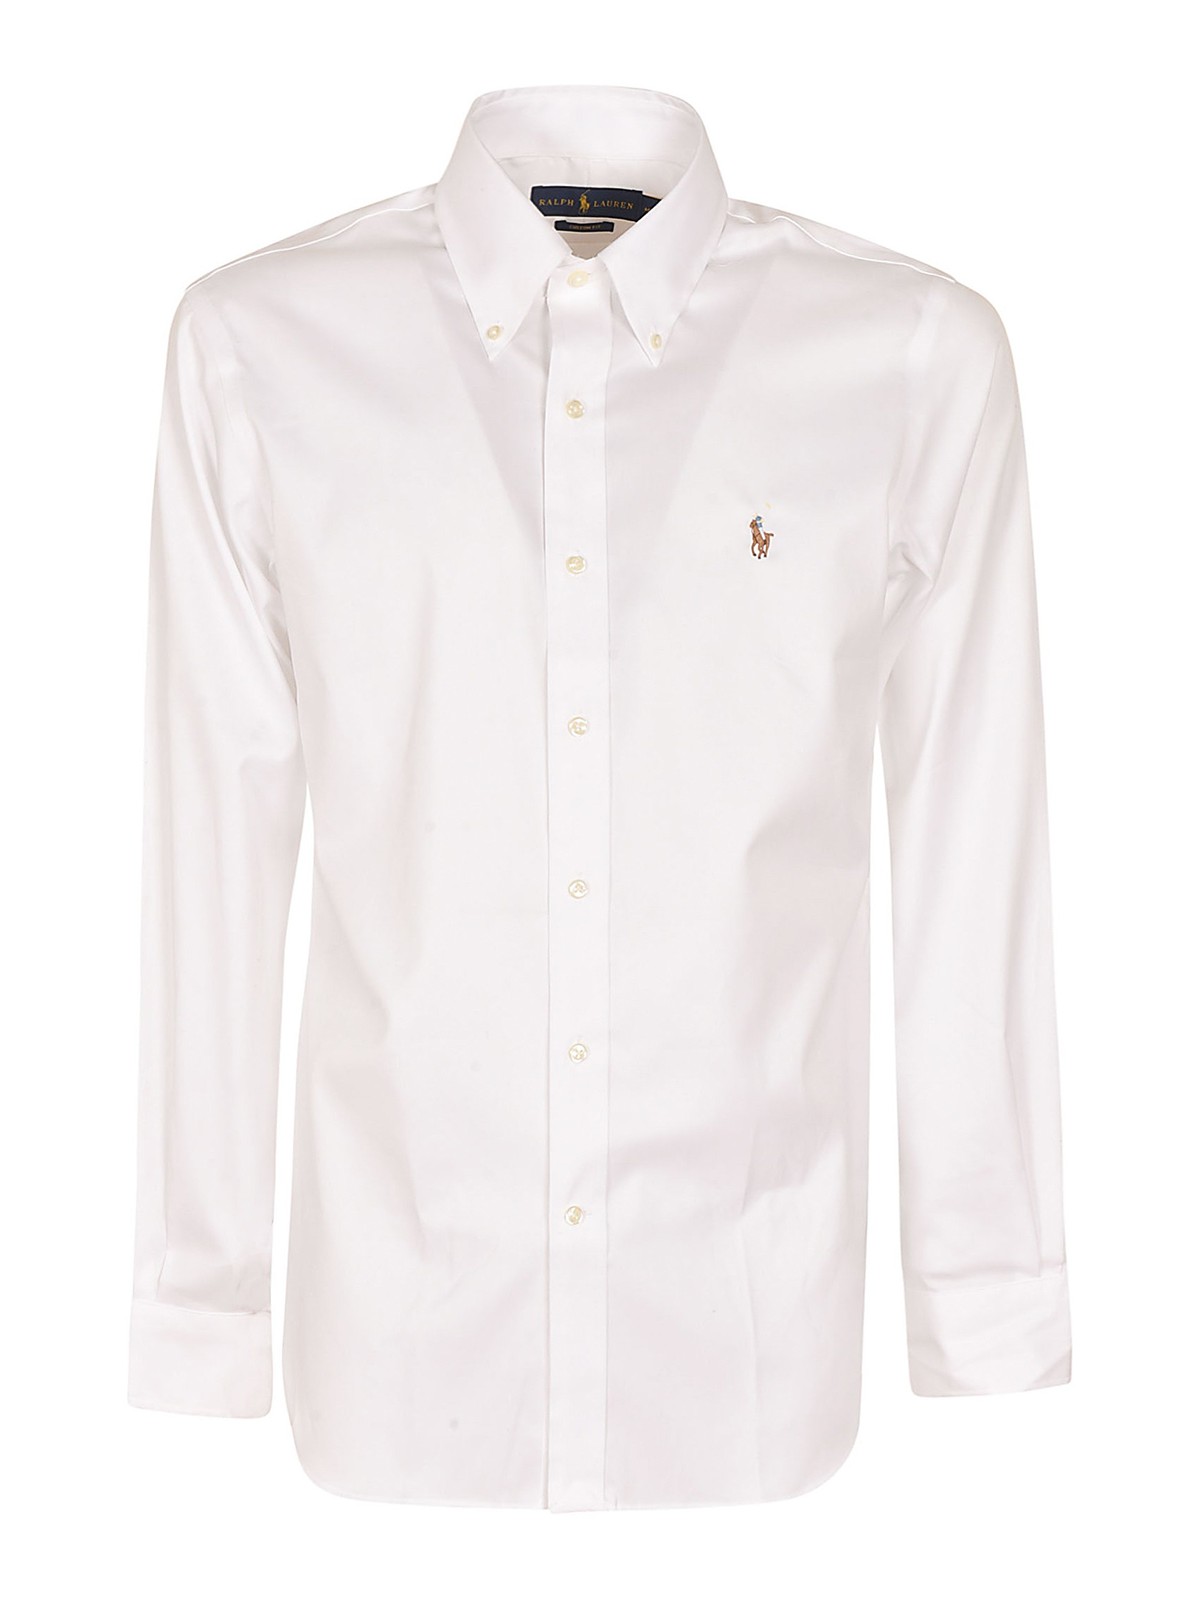 Polo Ralph Lauren Pinpoint Cotton Shirt In White